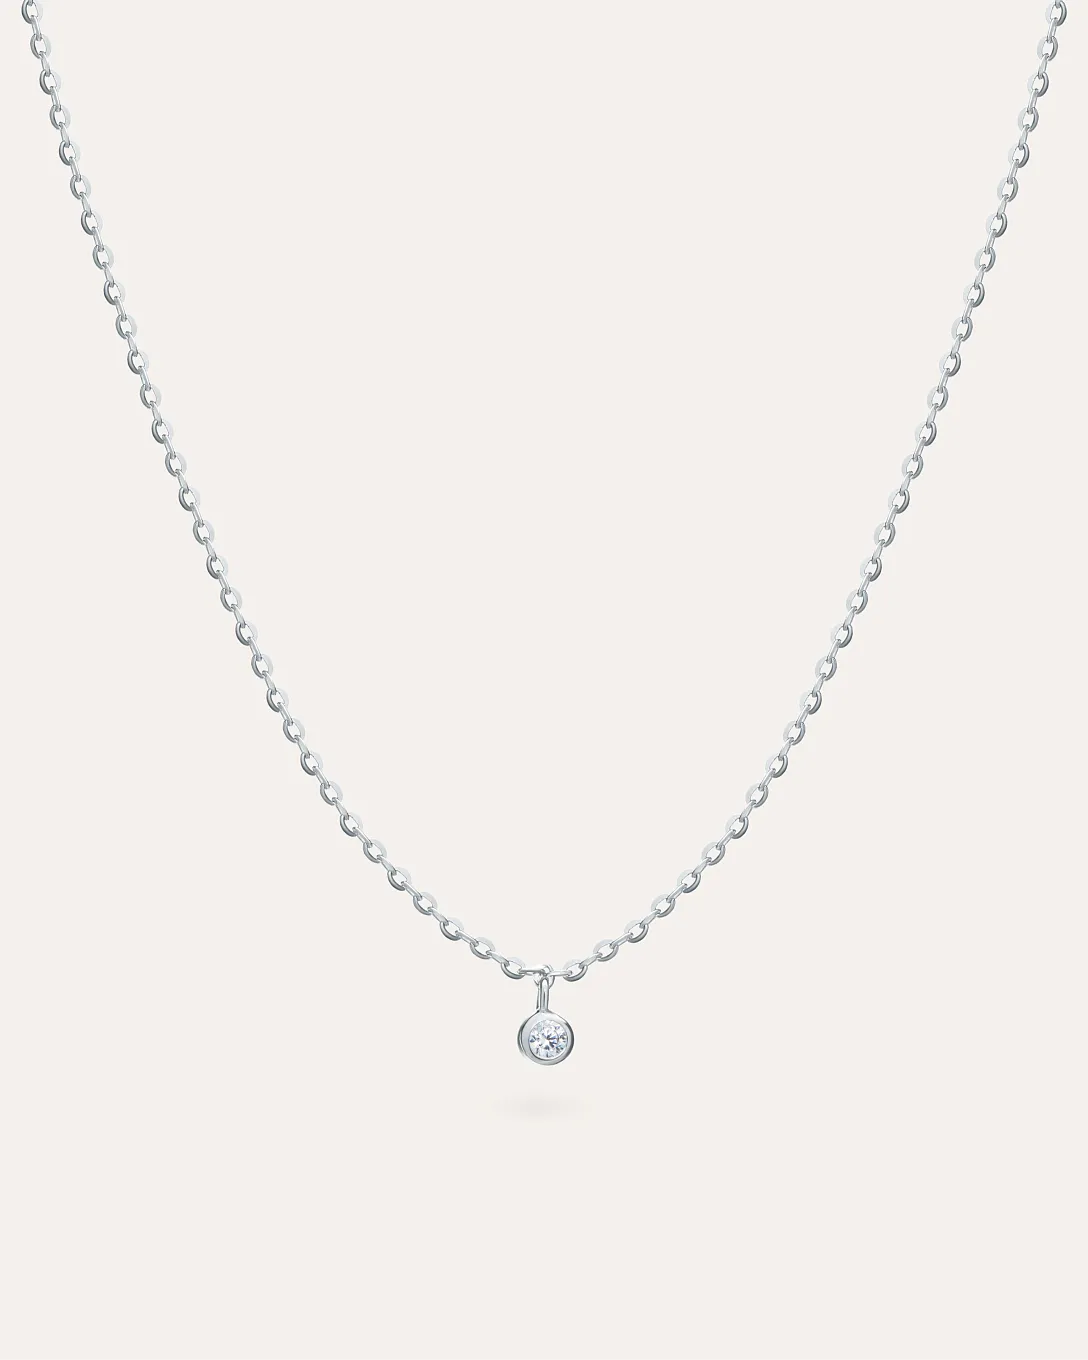 Silver necklace with Cubic Zirconia